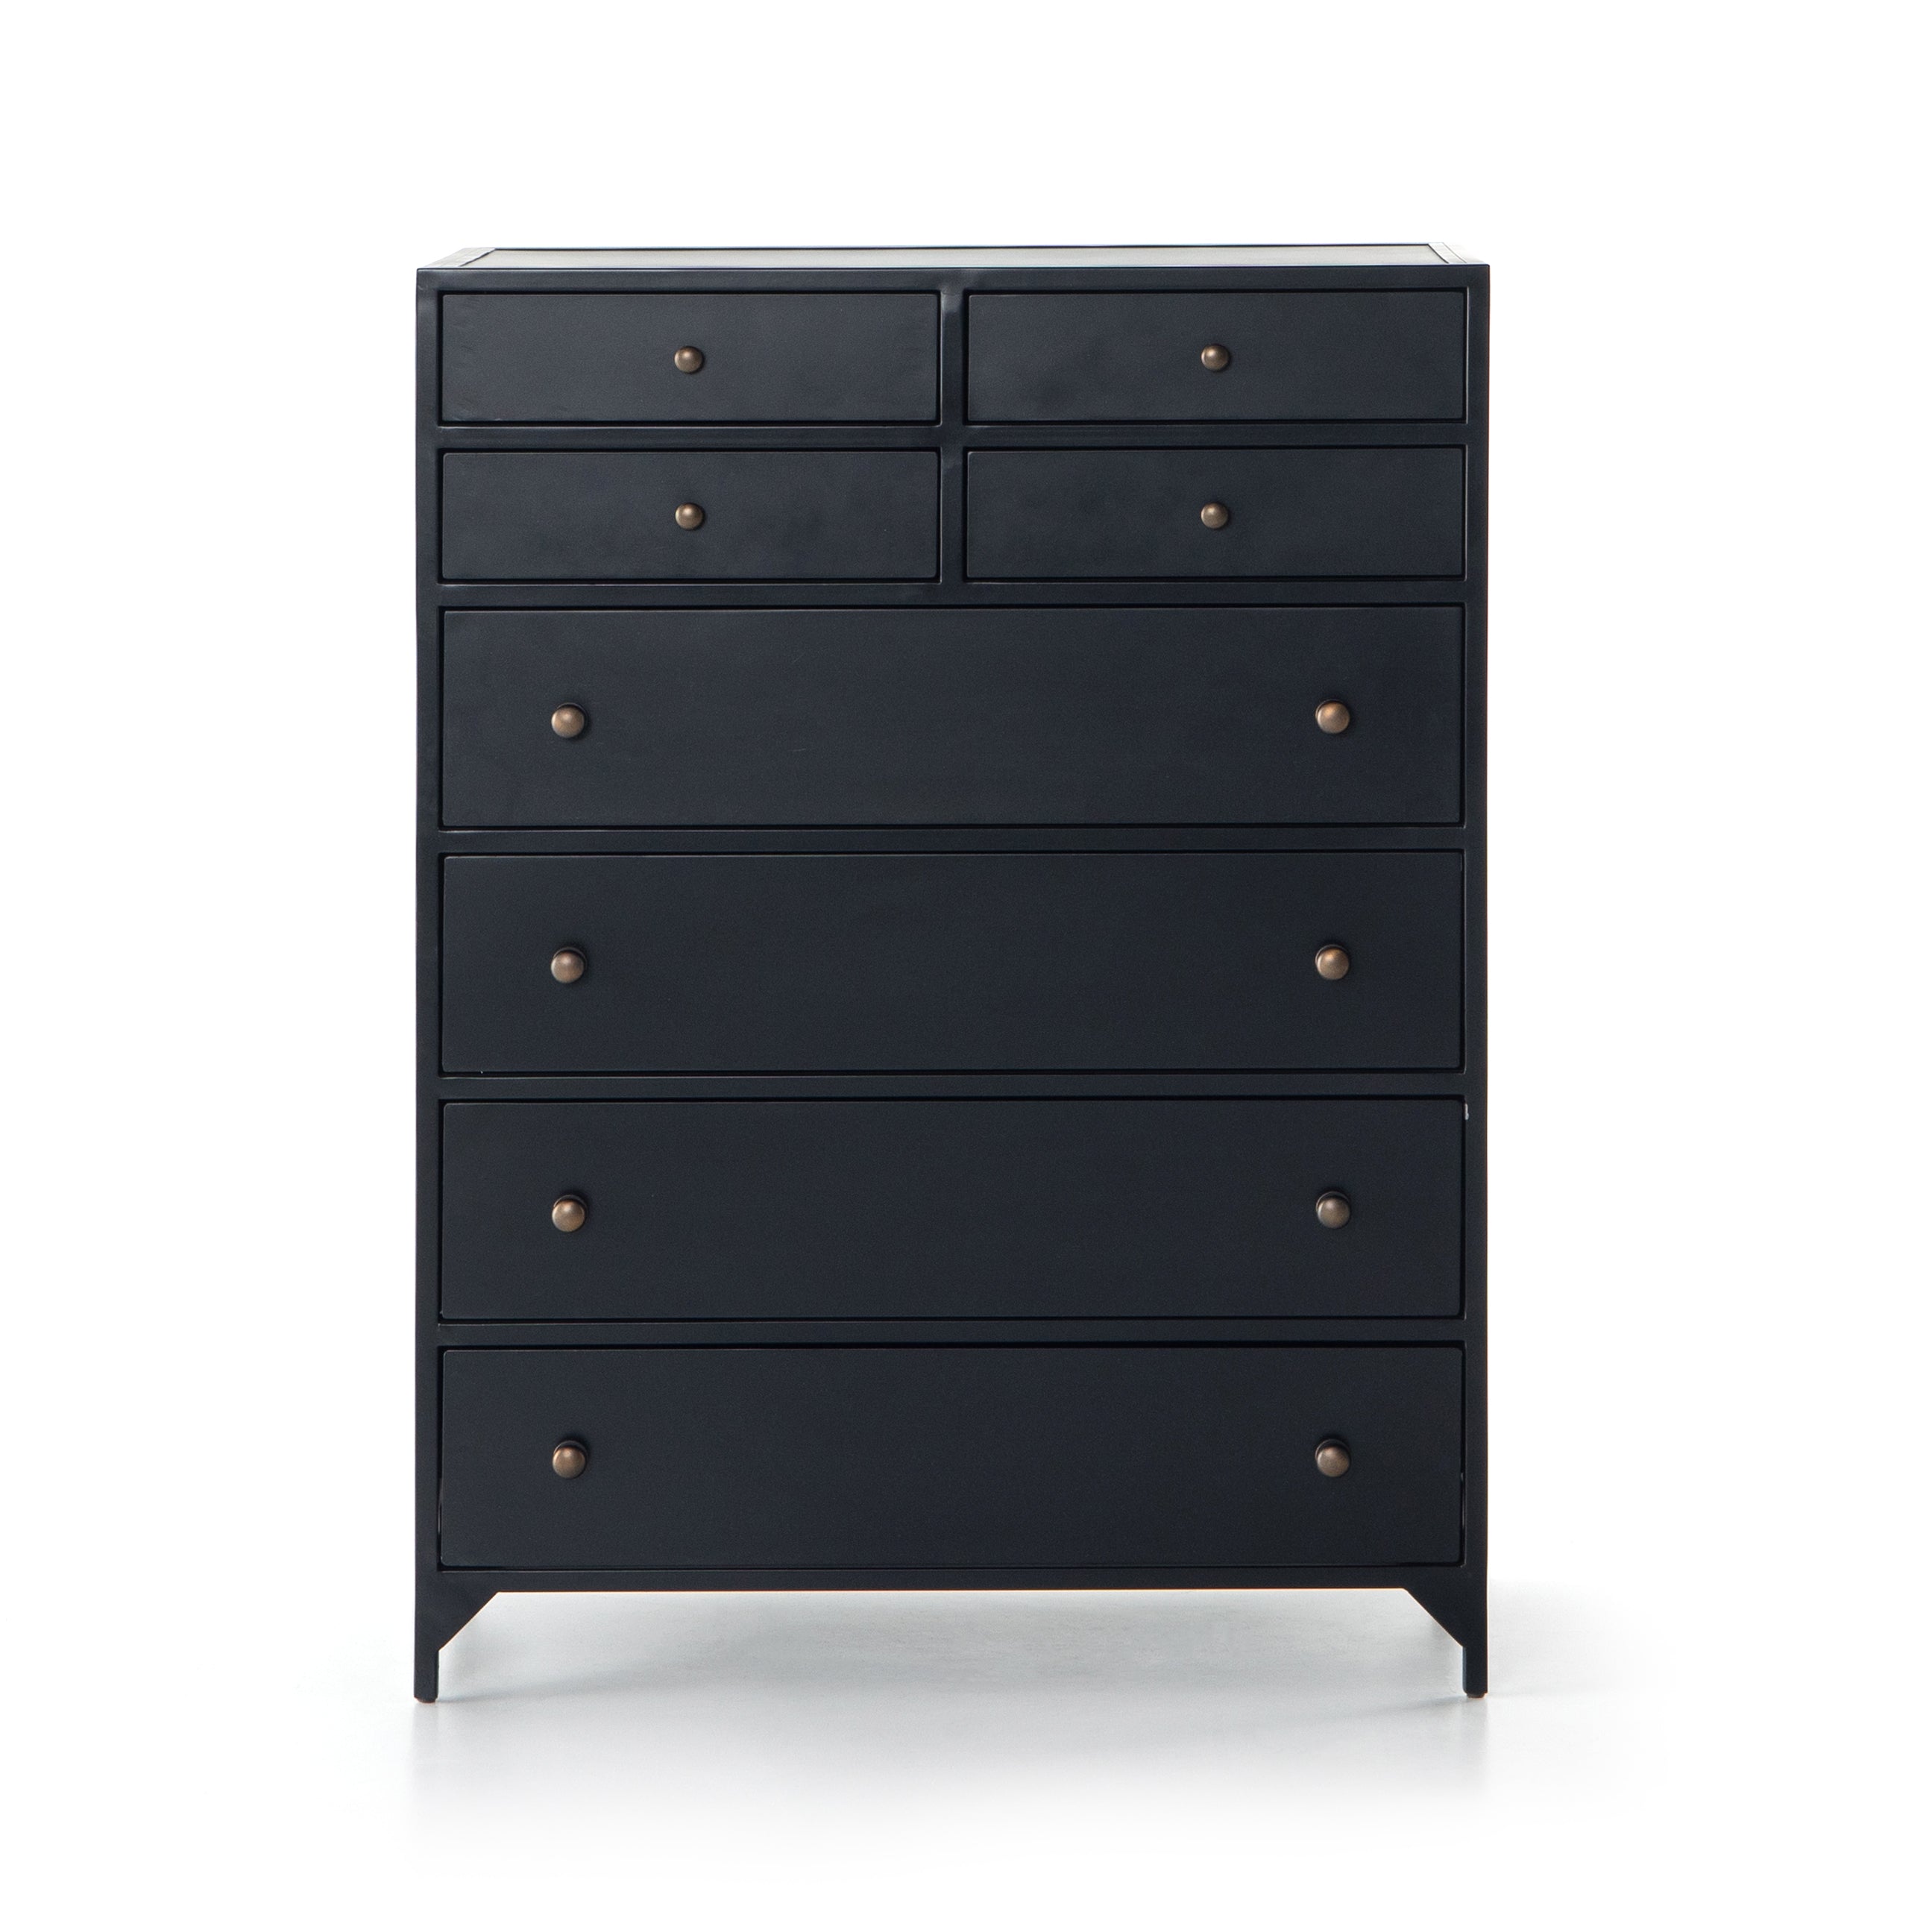 Sleek and industrial-inspired, this Belmont 8 Drawer Tall Dresser has black iron that forms a tall, spacious eight-drawers dresser. The brass knobs bring a cool contrast to any bedroom.   Overall Dimensions: 35.50